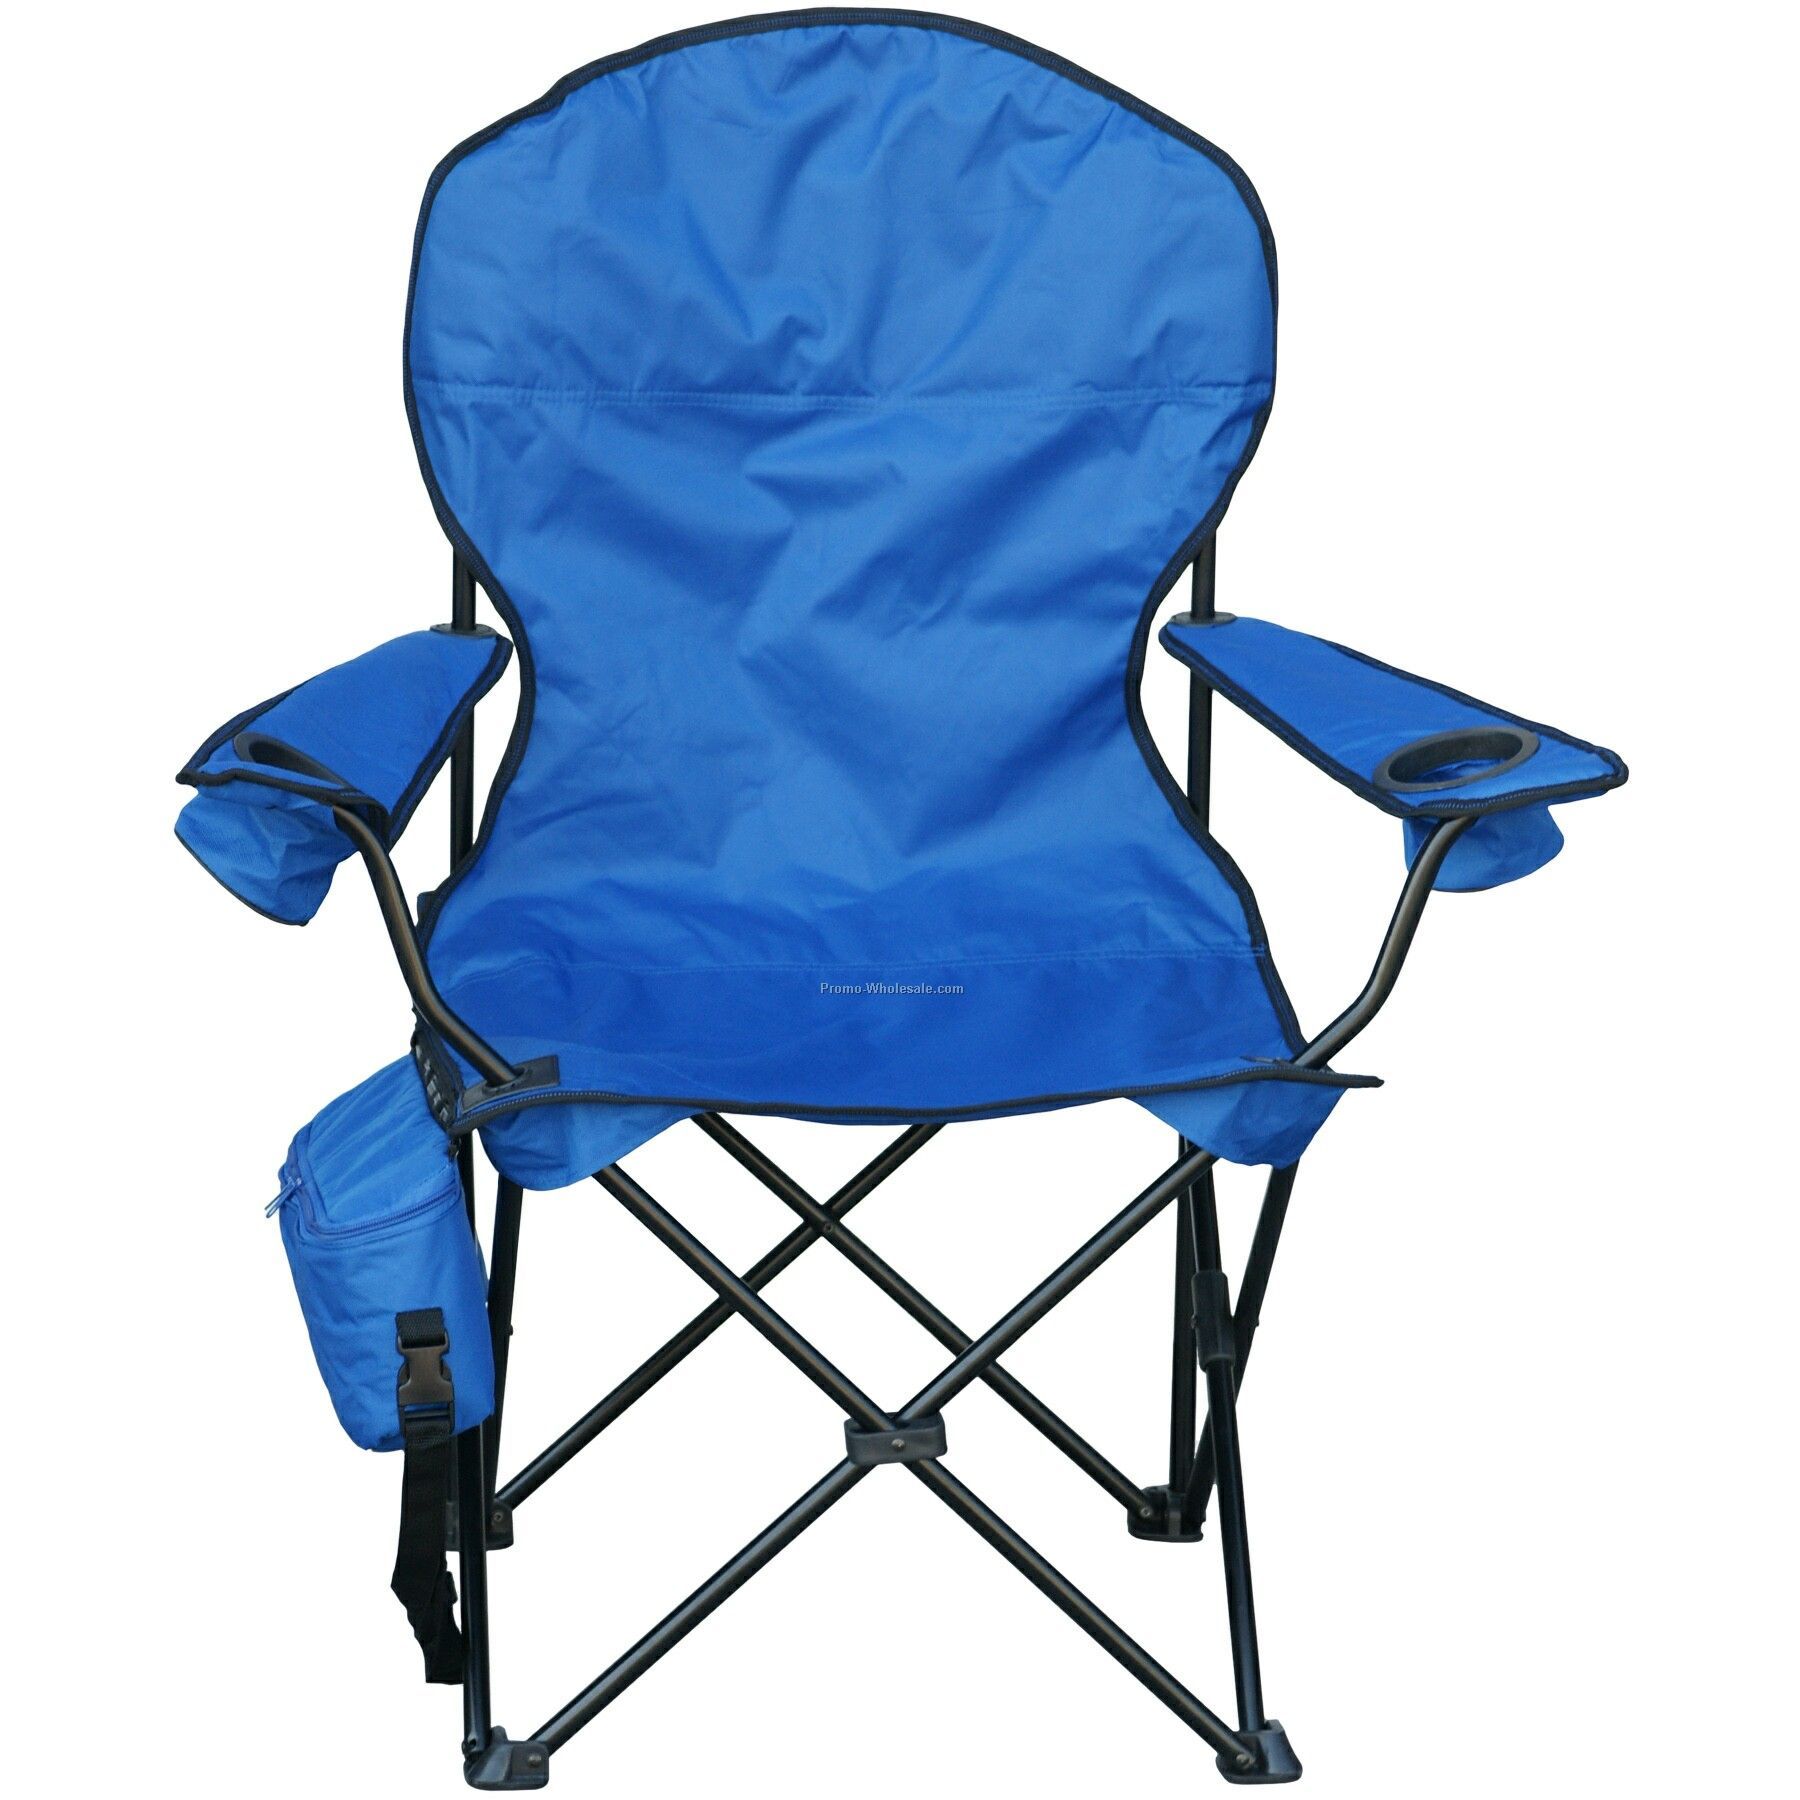 Deluxe Round Back Captain's Chair W/ Removable 6-pack Cooler And Carry Bag